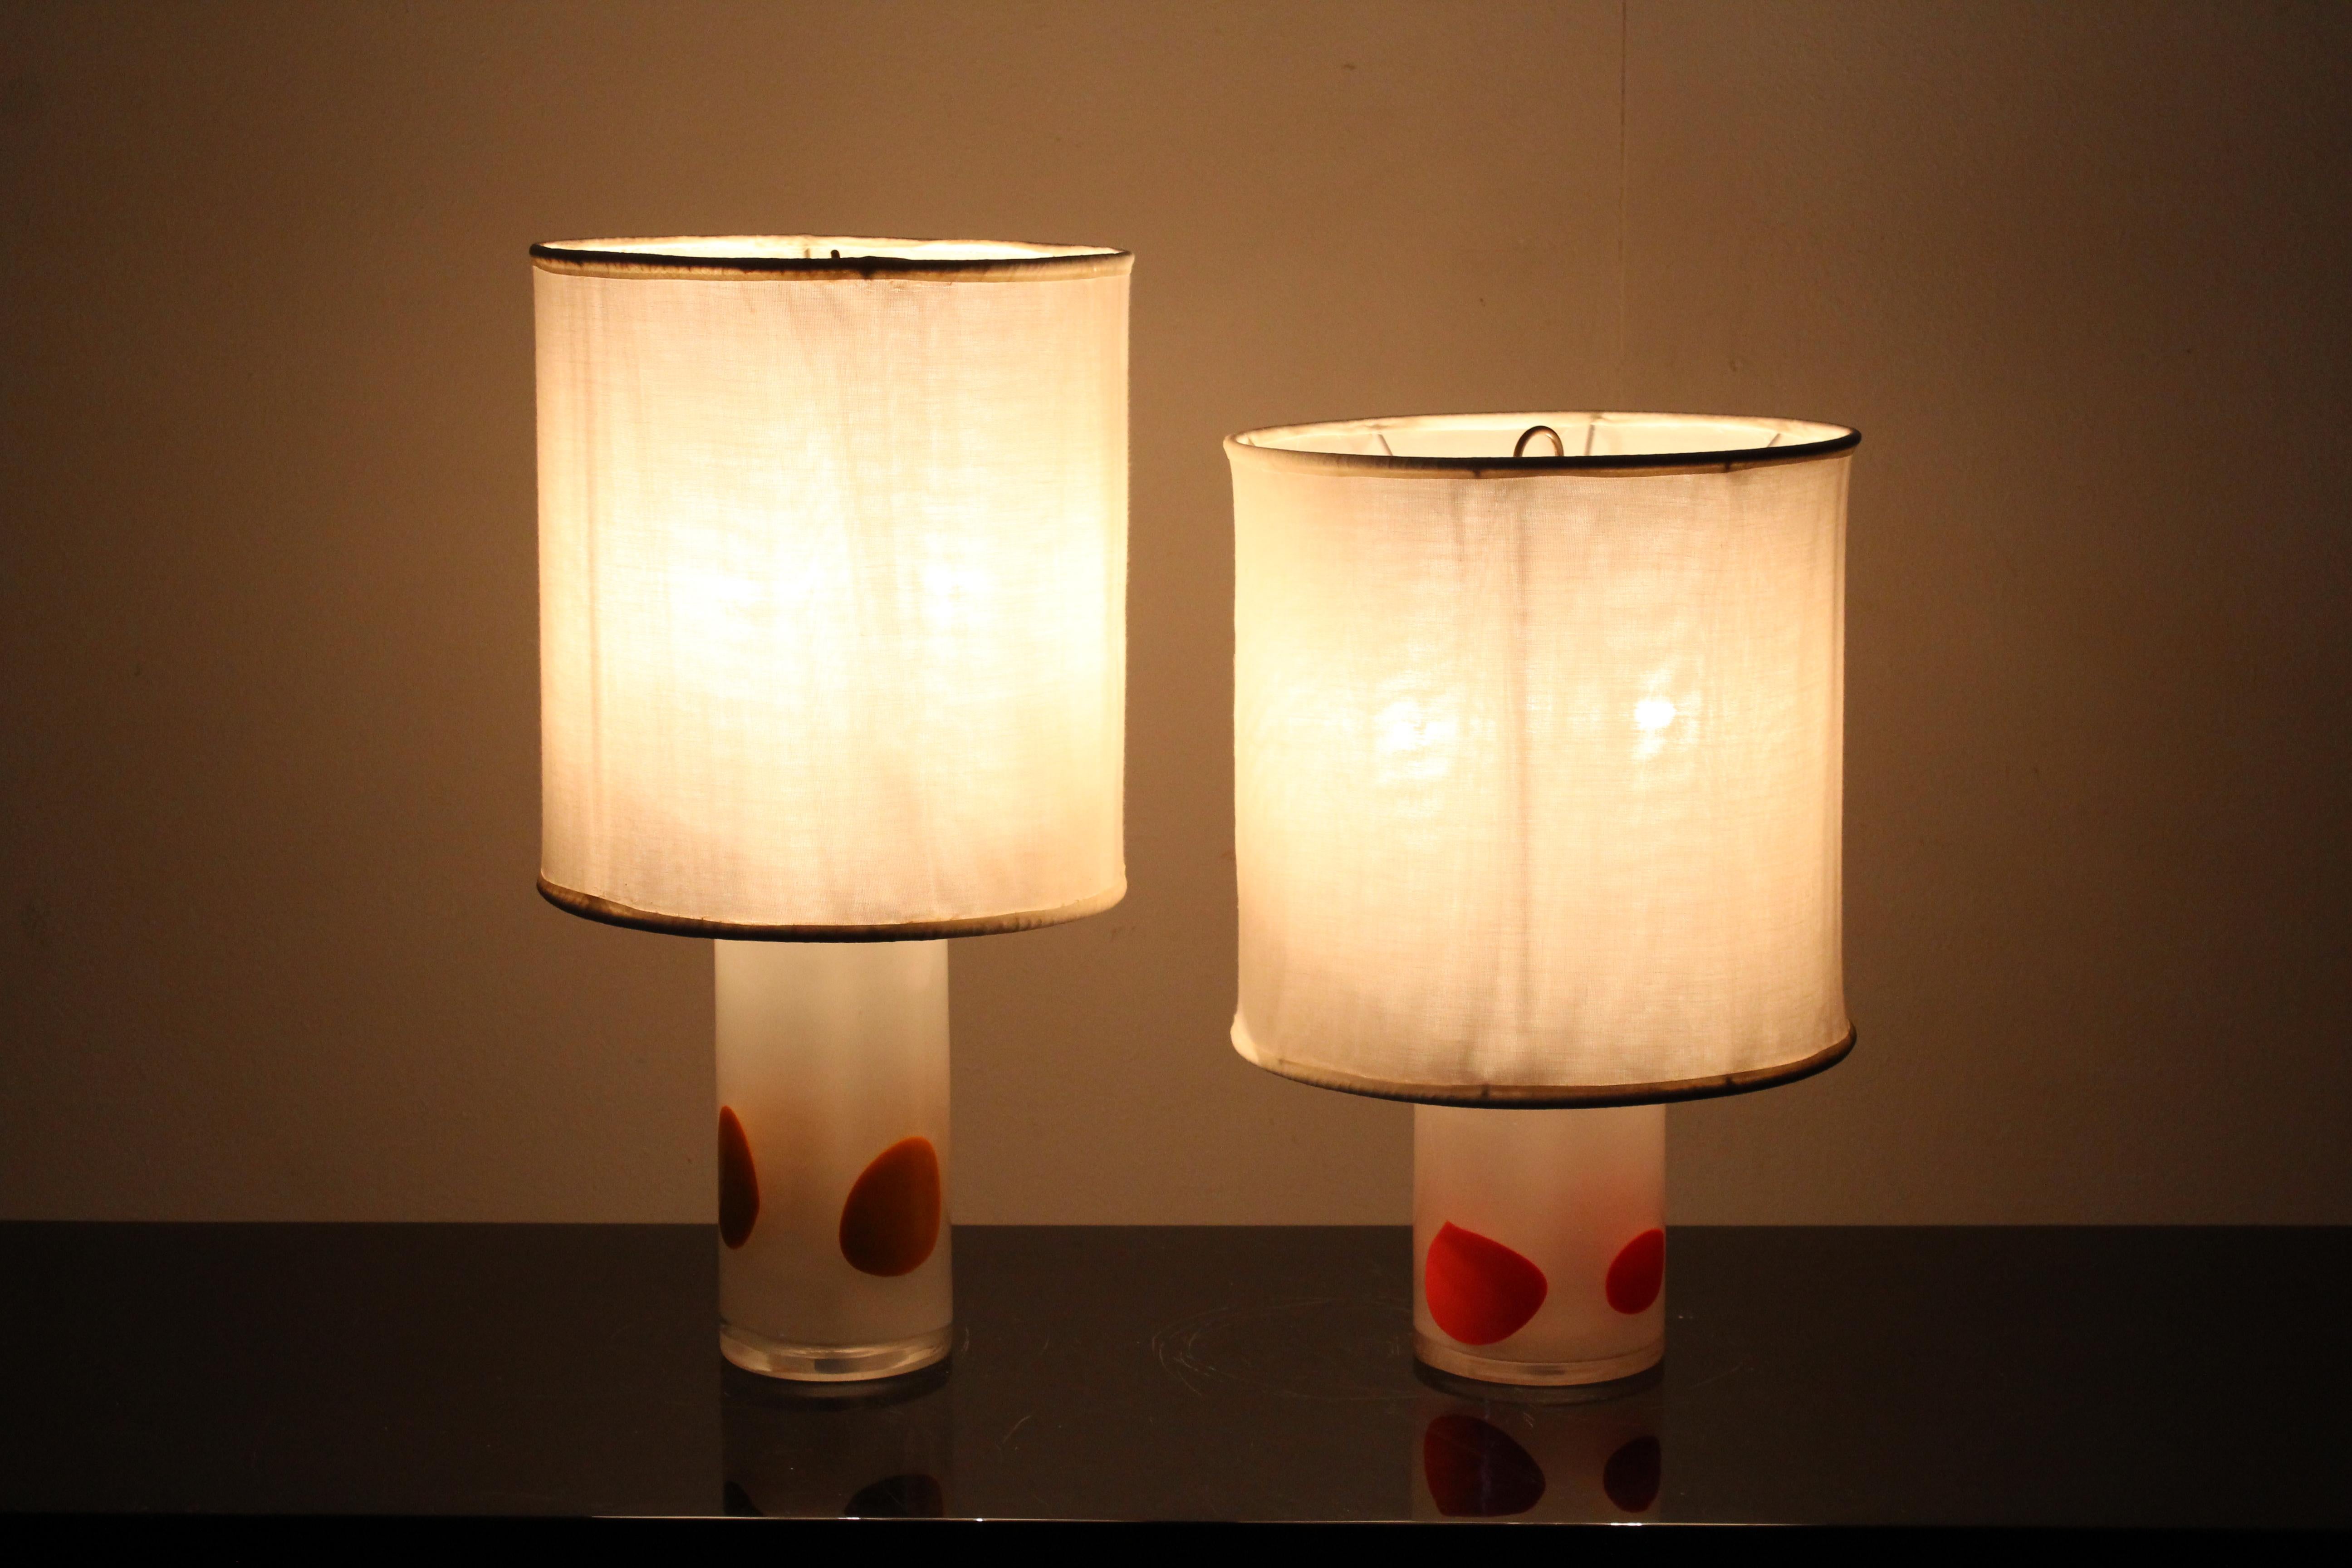 Pair of geometric table lamps with orange, yellow and withe, bodies, 1960s.
Wear consistent with age and use.